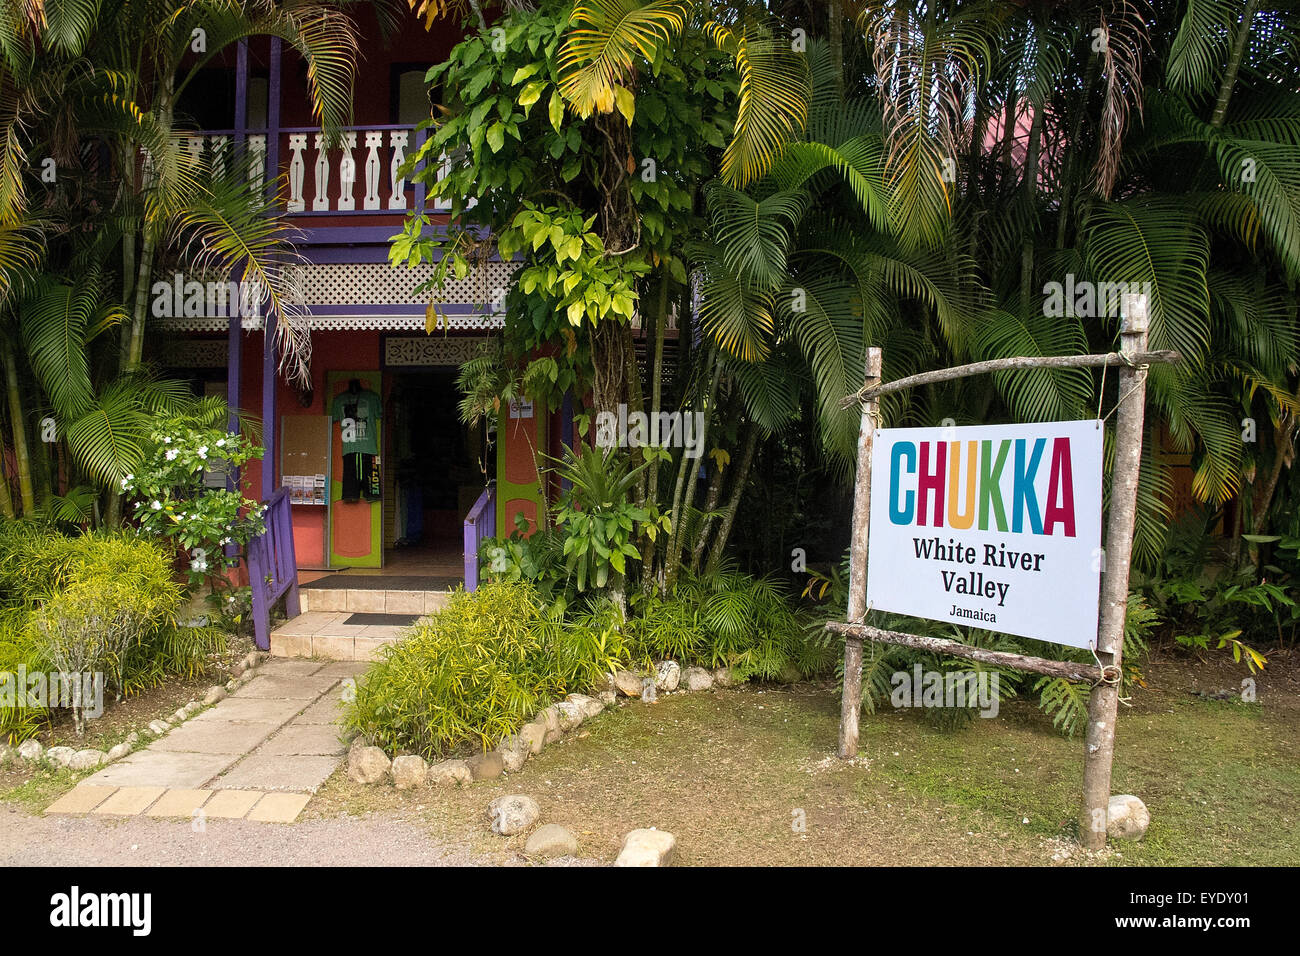 Chukka White River Valley sign in front of a gift shop, Ocho Rios, St. Ann, Jamaica Stock Photo